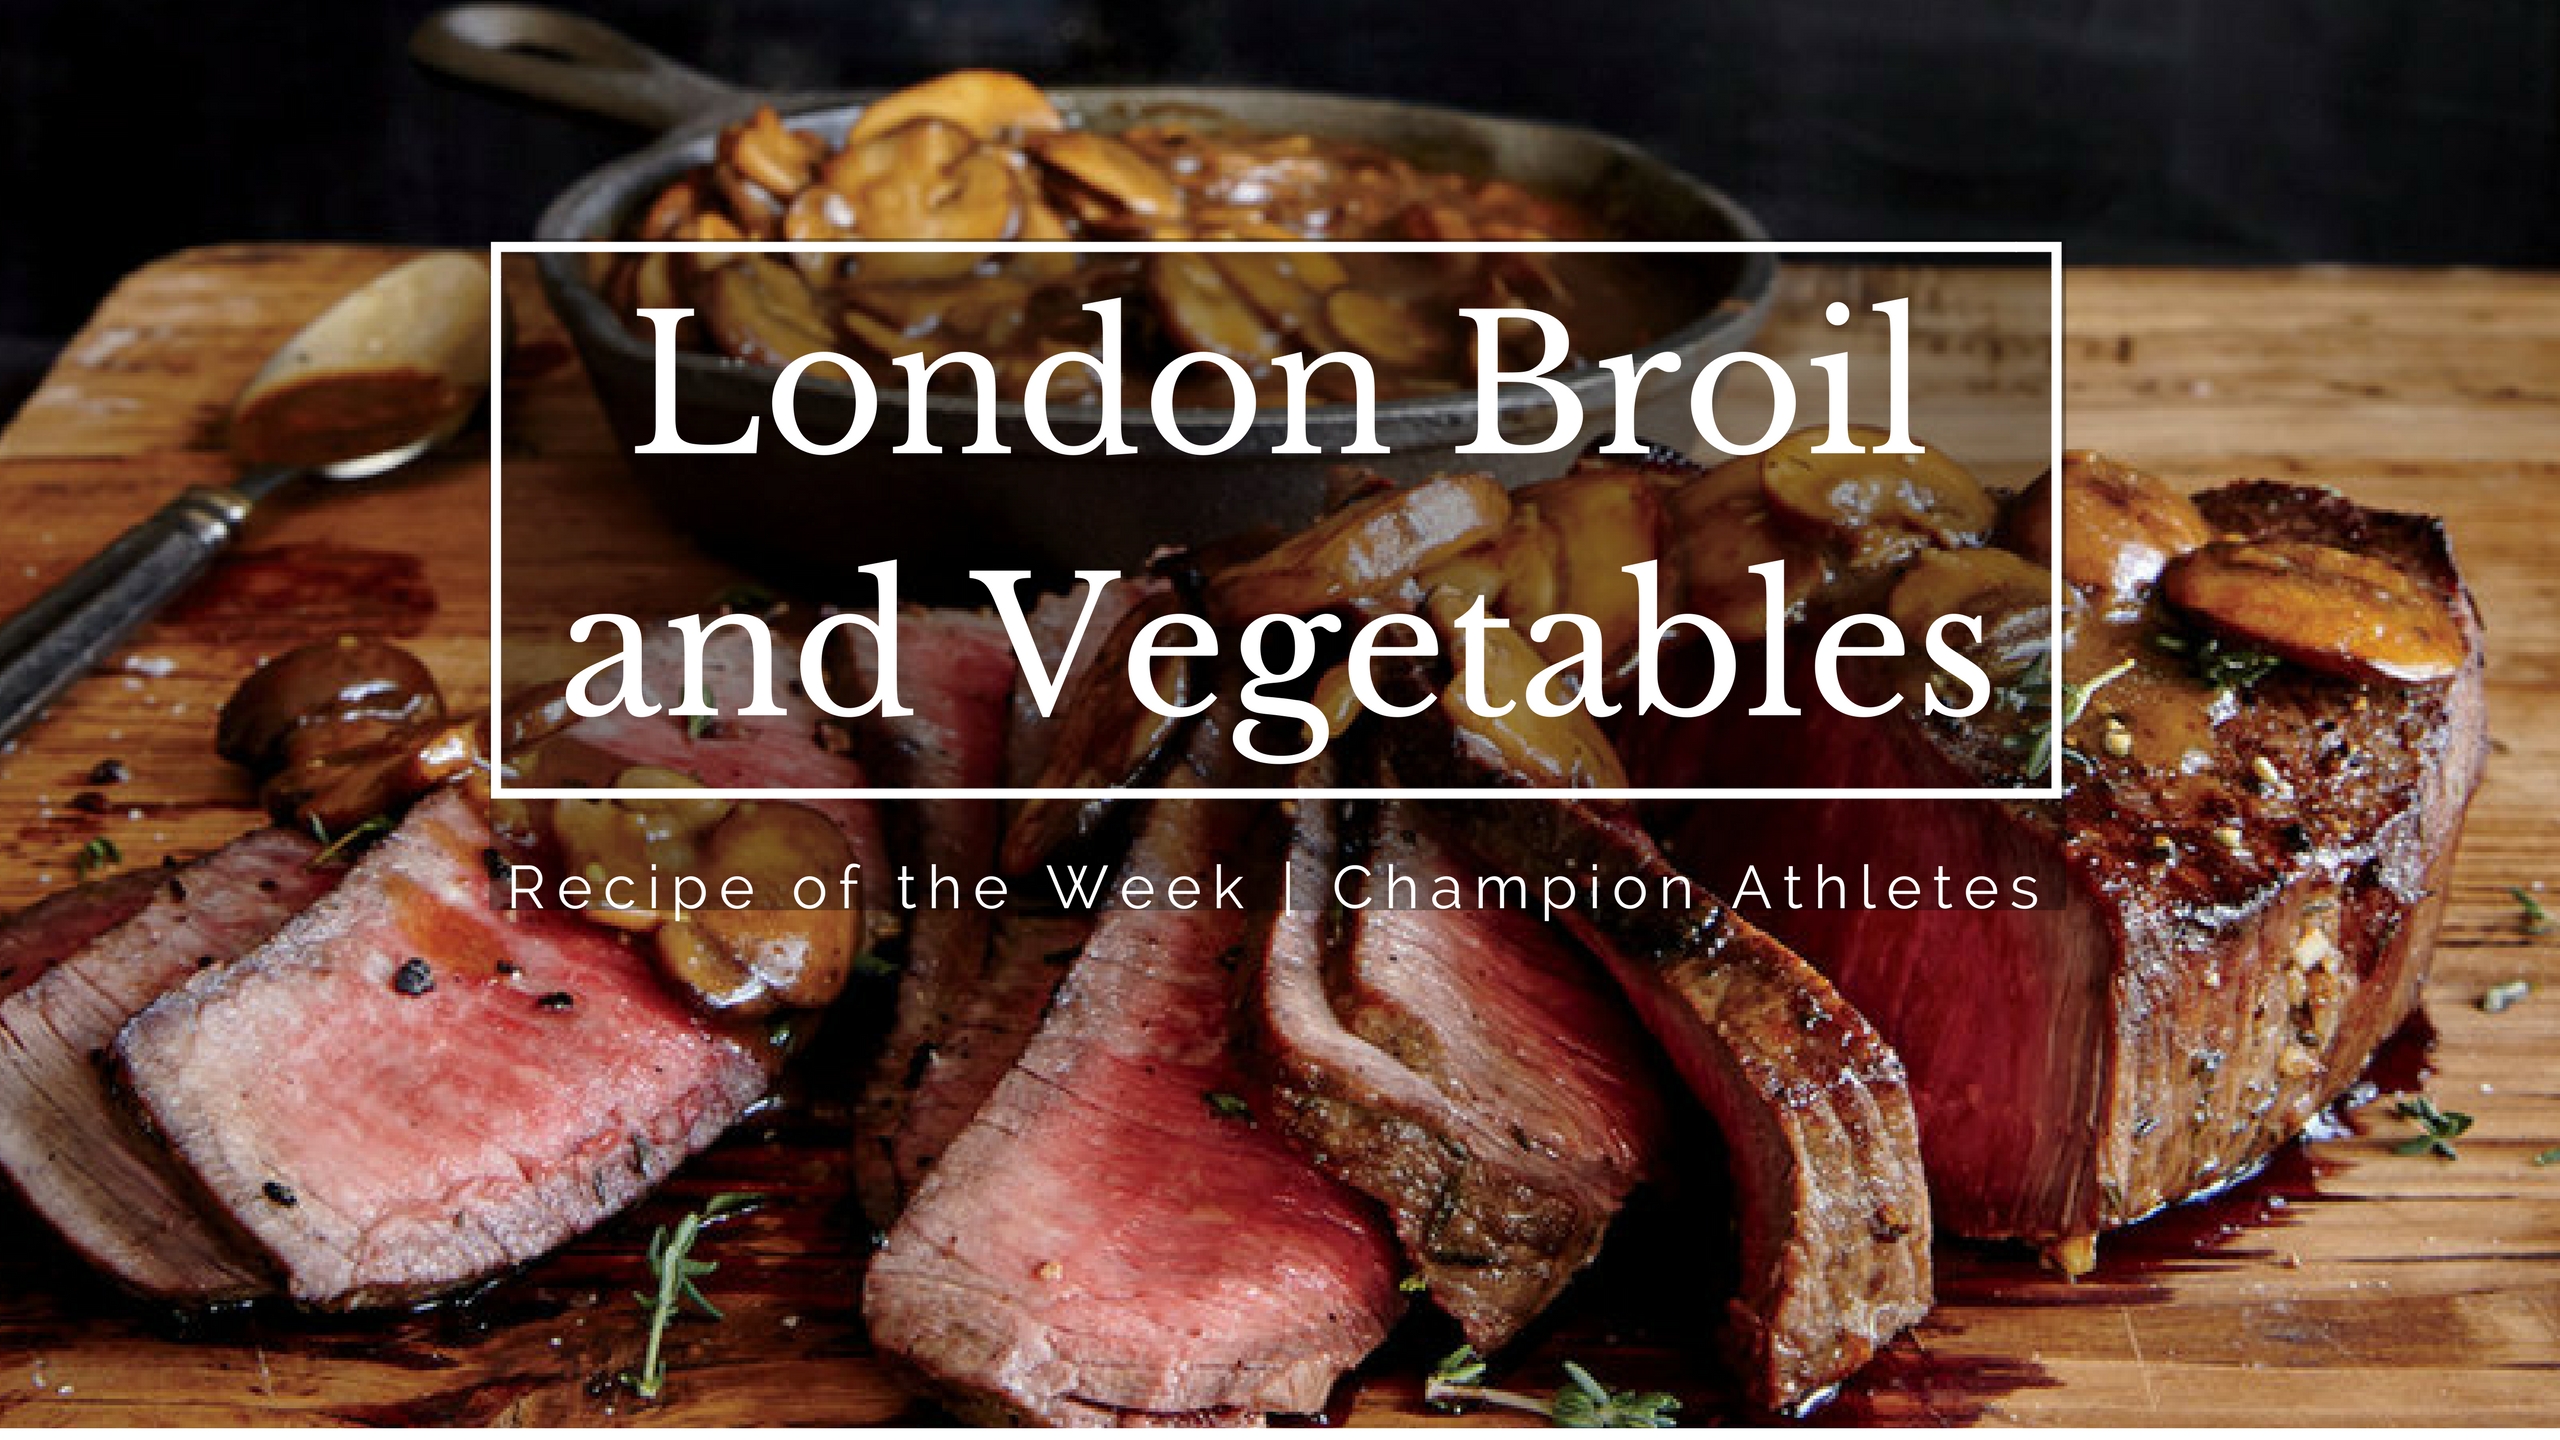 London Broil and Vegetables